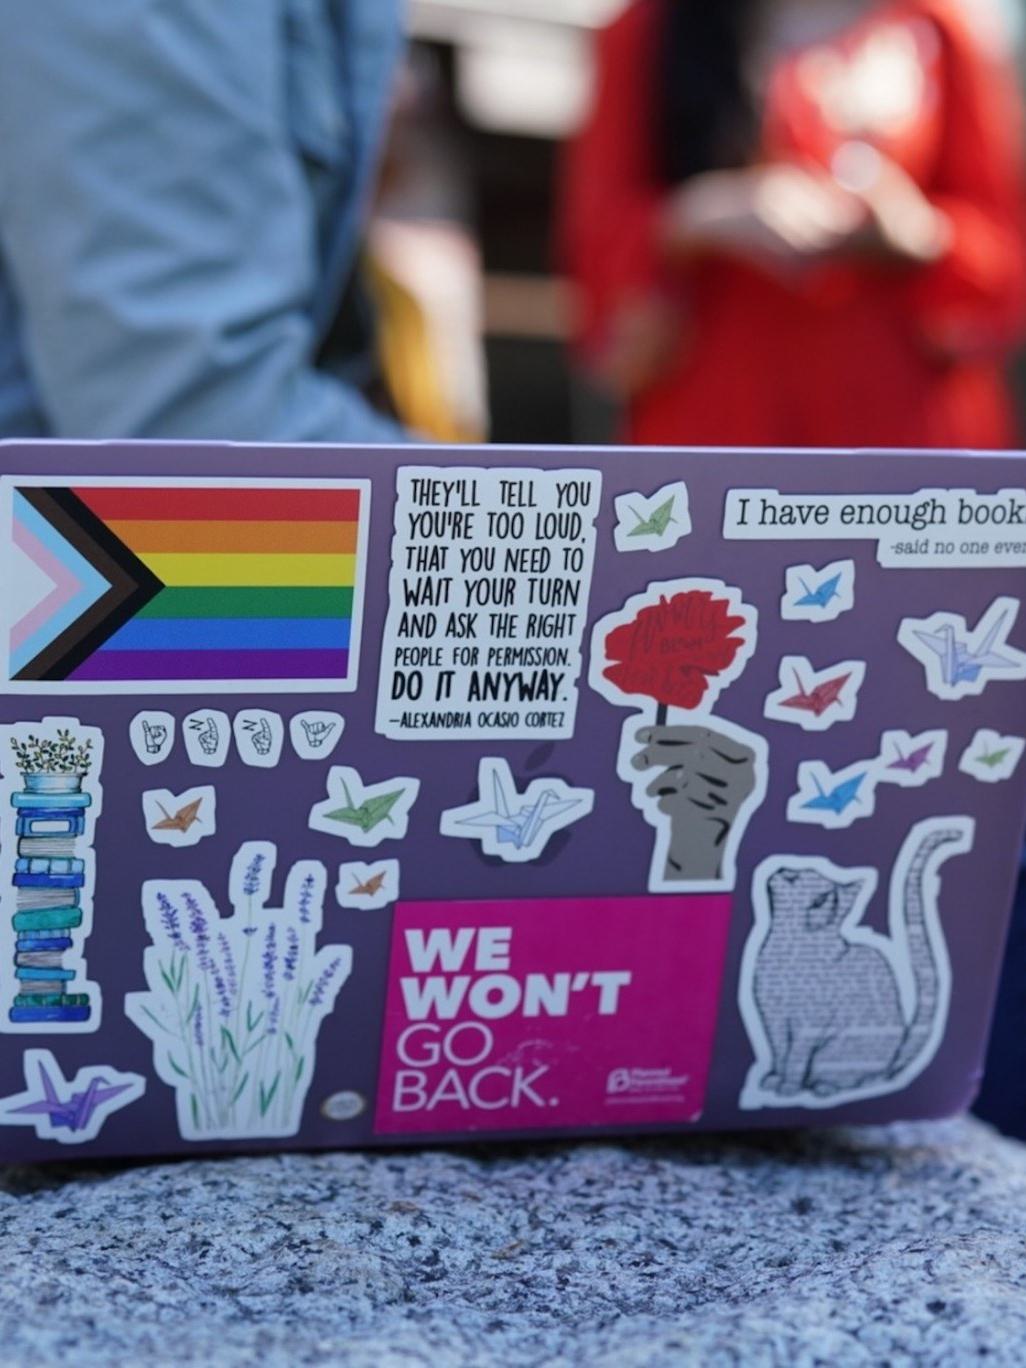 Laptop covered in stickers.